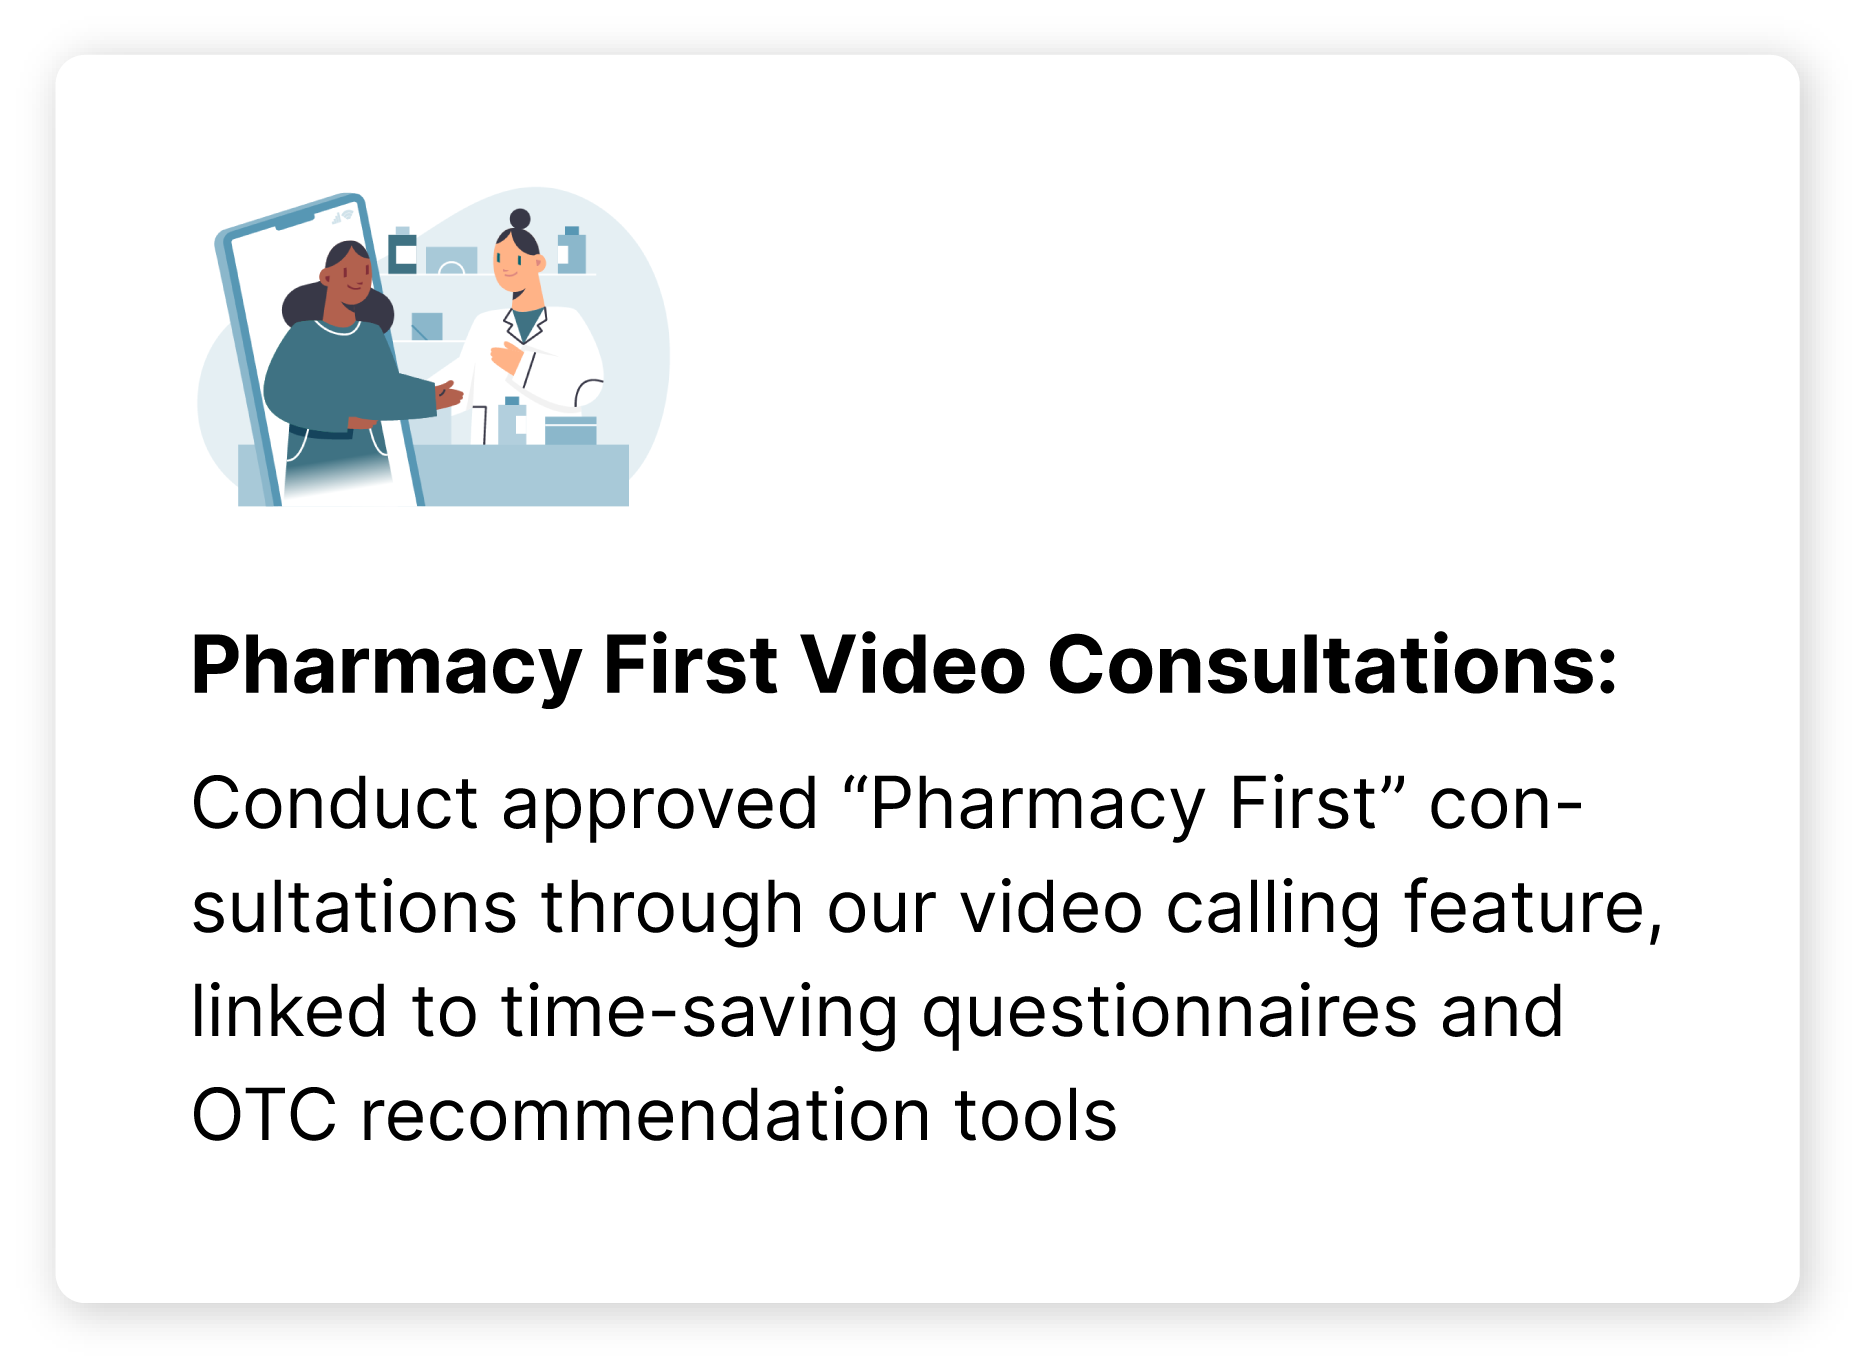 Carousel - Pharmacy First Video Consultations@4x